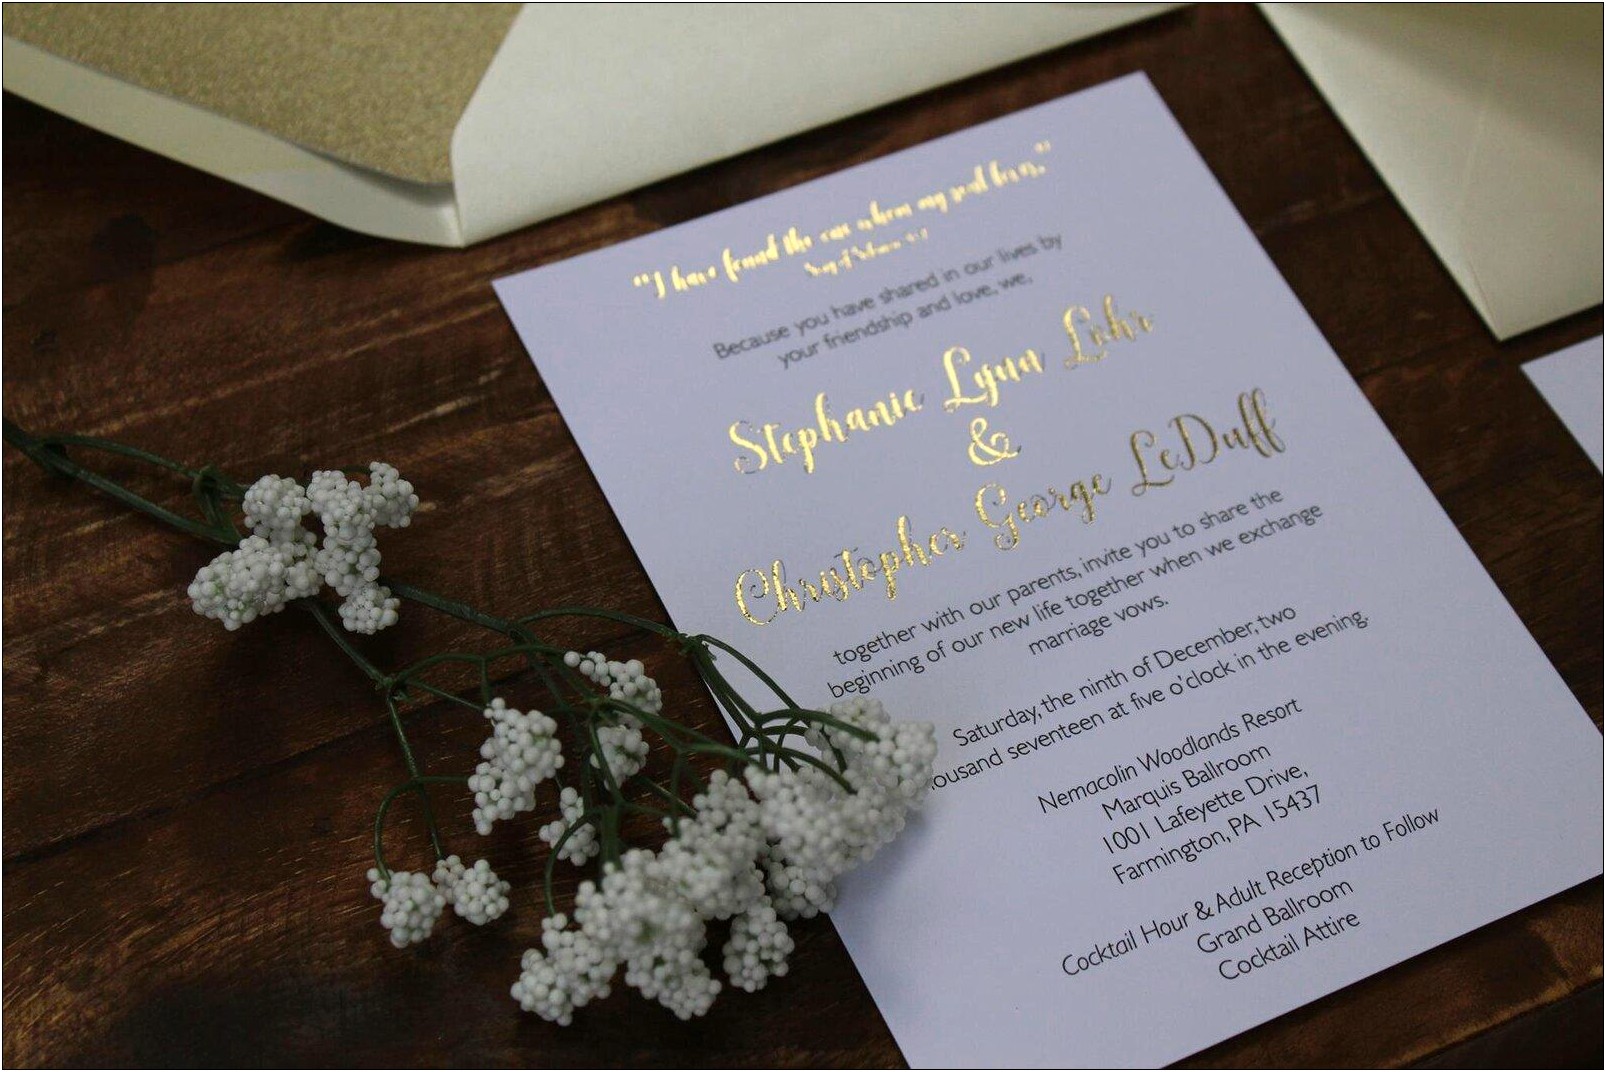 Wedding Invitation With The Blessing Of Our Parents